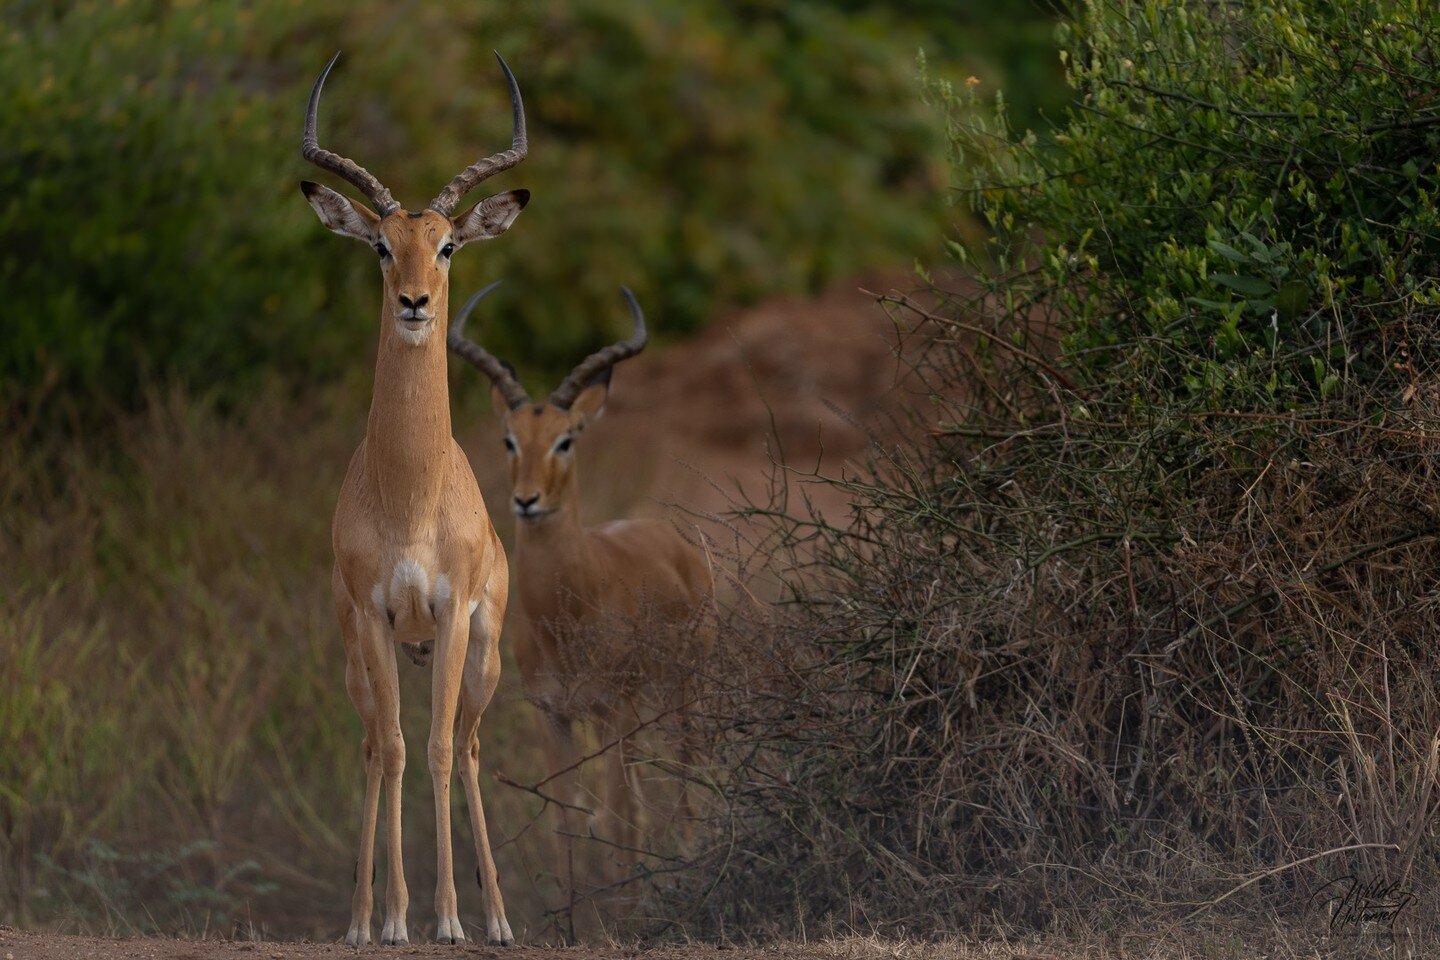 It's a male impala's role to looks after a group of females and produce offspring. 
But competition is tough and these few spots are heavily fought over. The ones that don't succeed (for the moment in time) form alliances with their competitors which